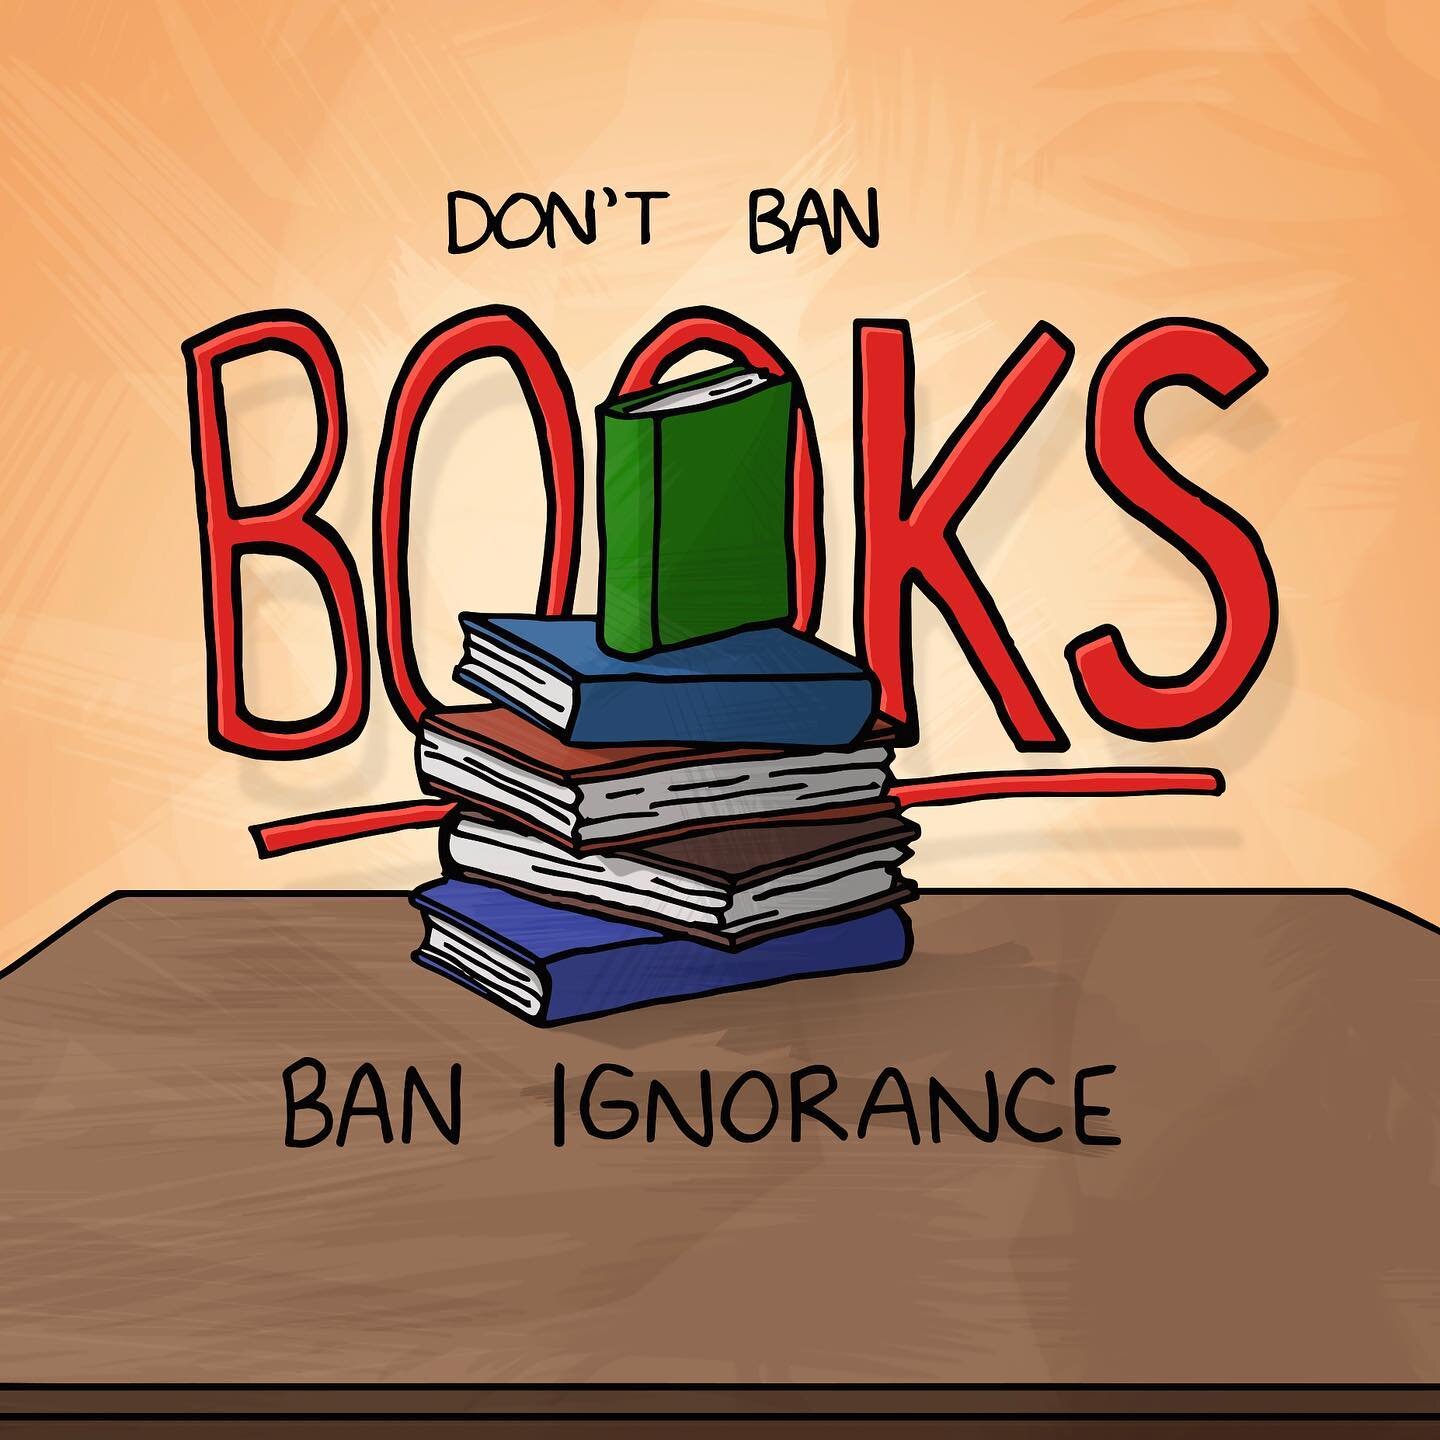 Don&rsquo;t ban books. Ban ignorance. 📚
Seriously. Educate yourself with different perspectives so you may approach problems with a wealth of knowledge to find creative solutions, not a myopic view that doesn&rsquo;t allow for open dialogue.
#VoteBl